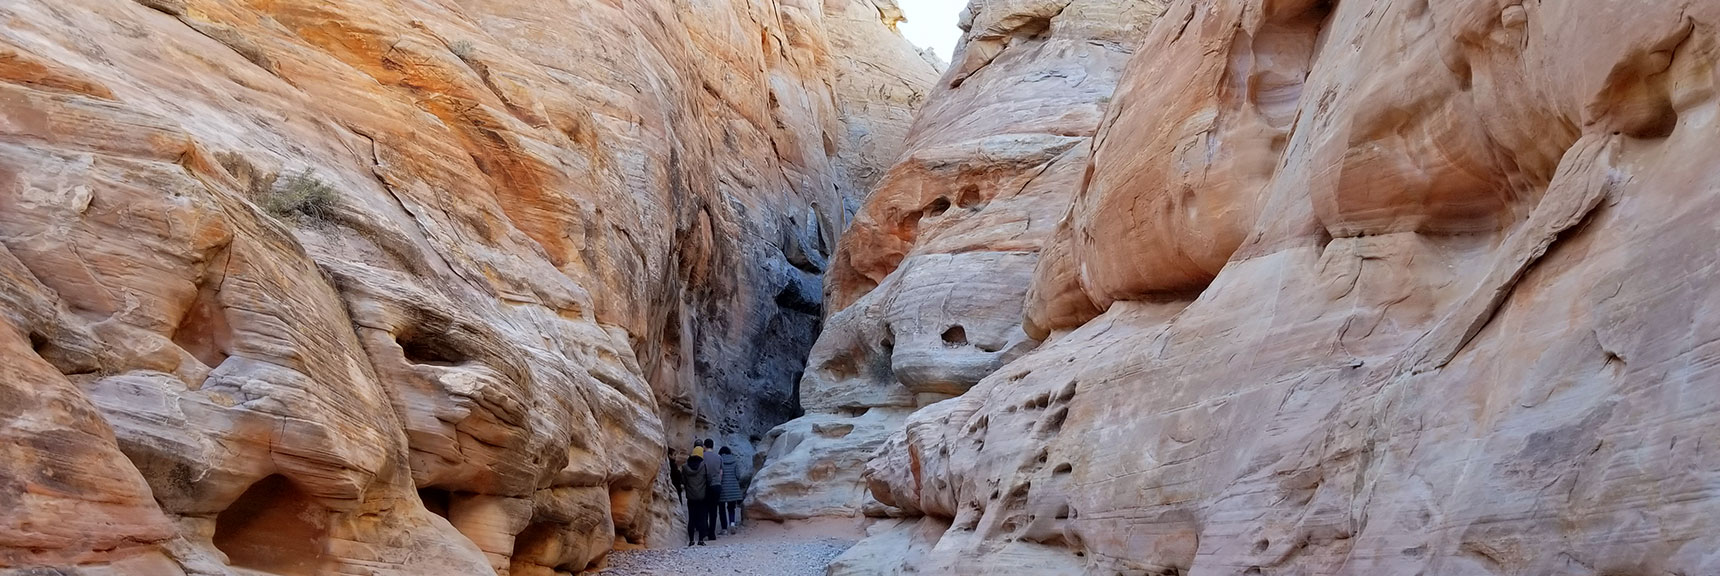 Entering the Slot Canyon at the Rear of White Domes Loop Trail in Valley of Fire State Park, Nevada